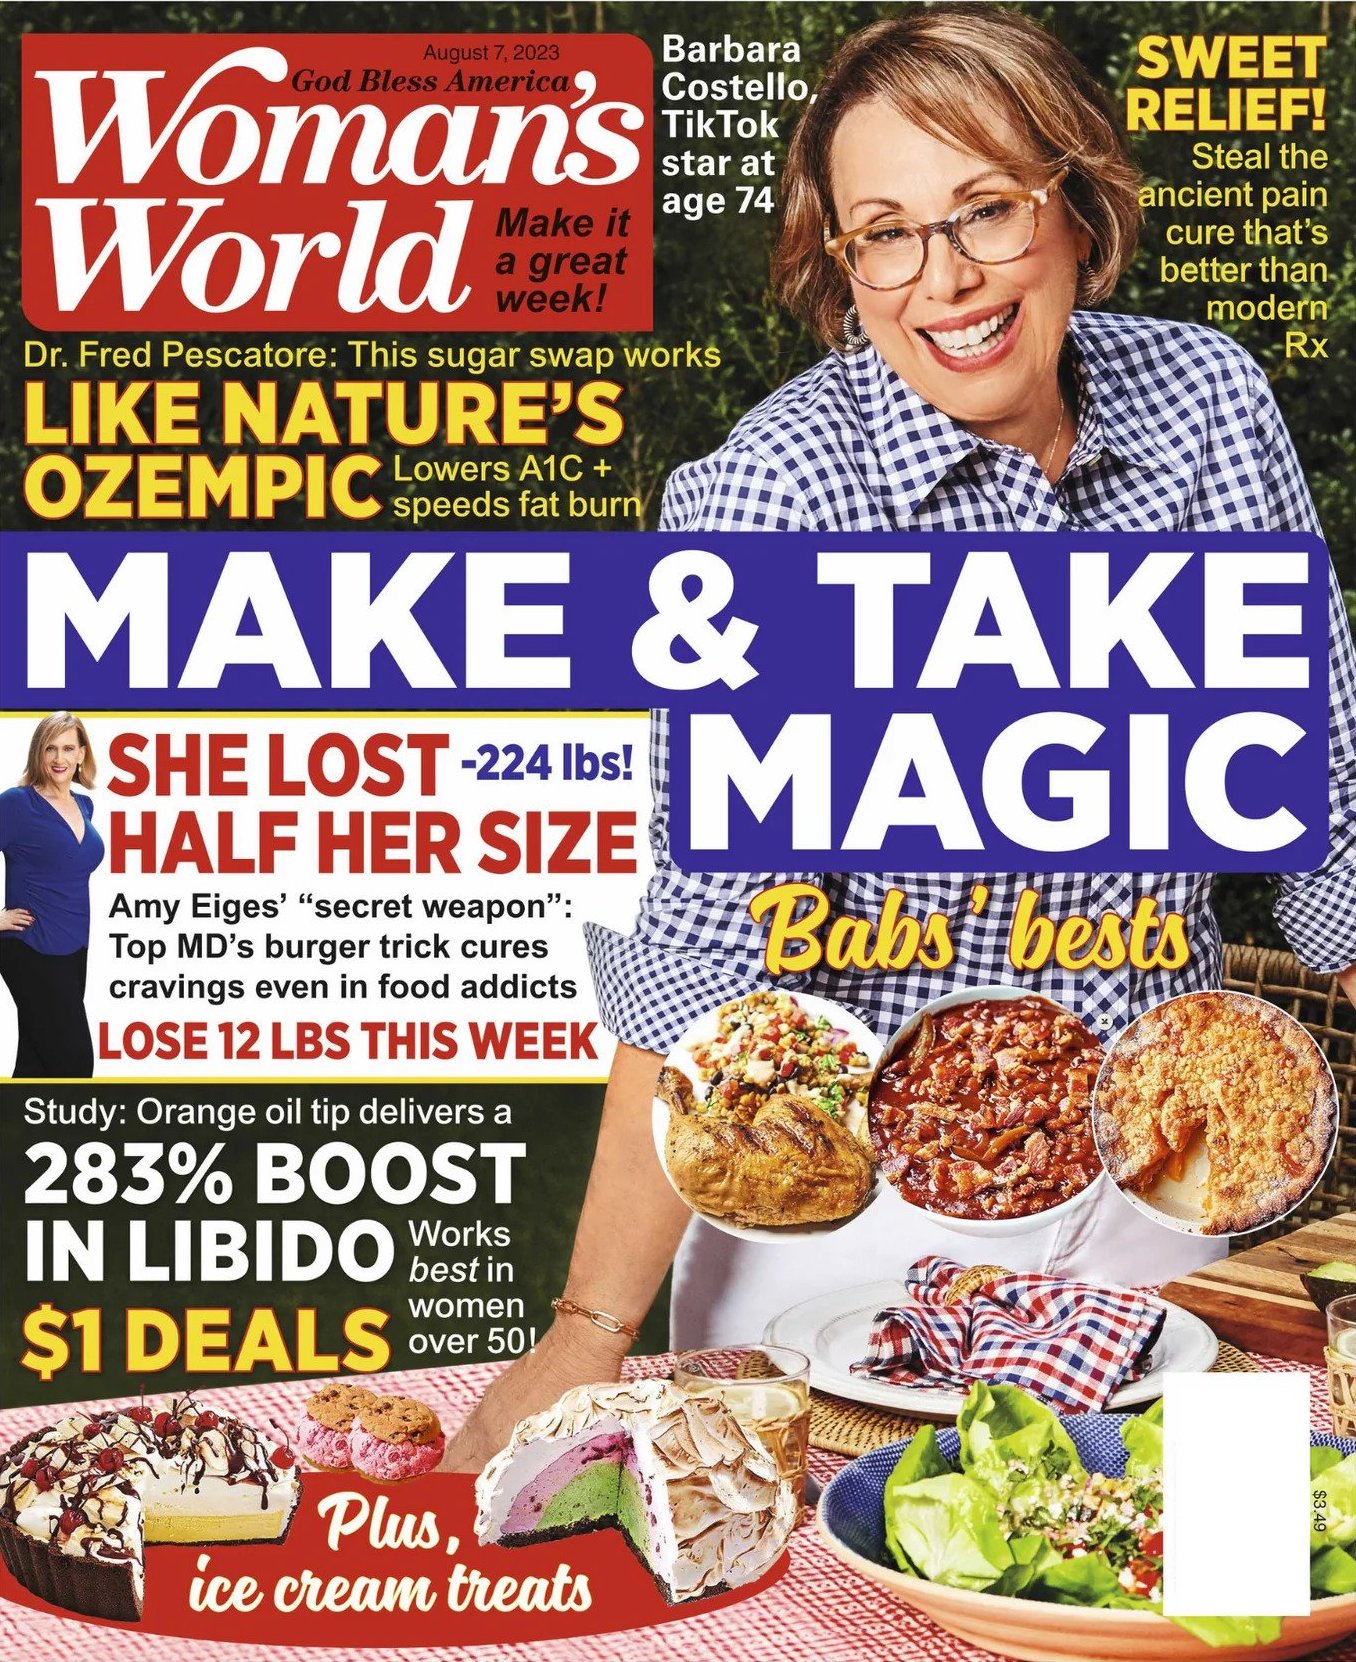 Subscribe to Woman's World